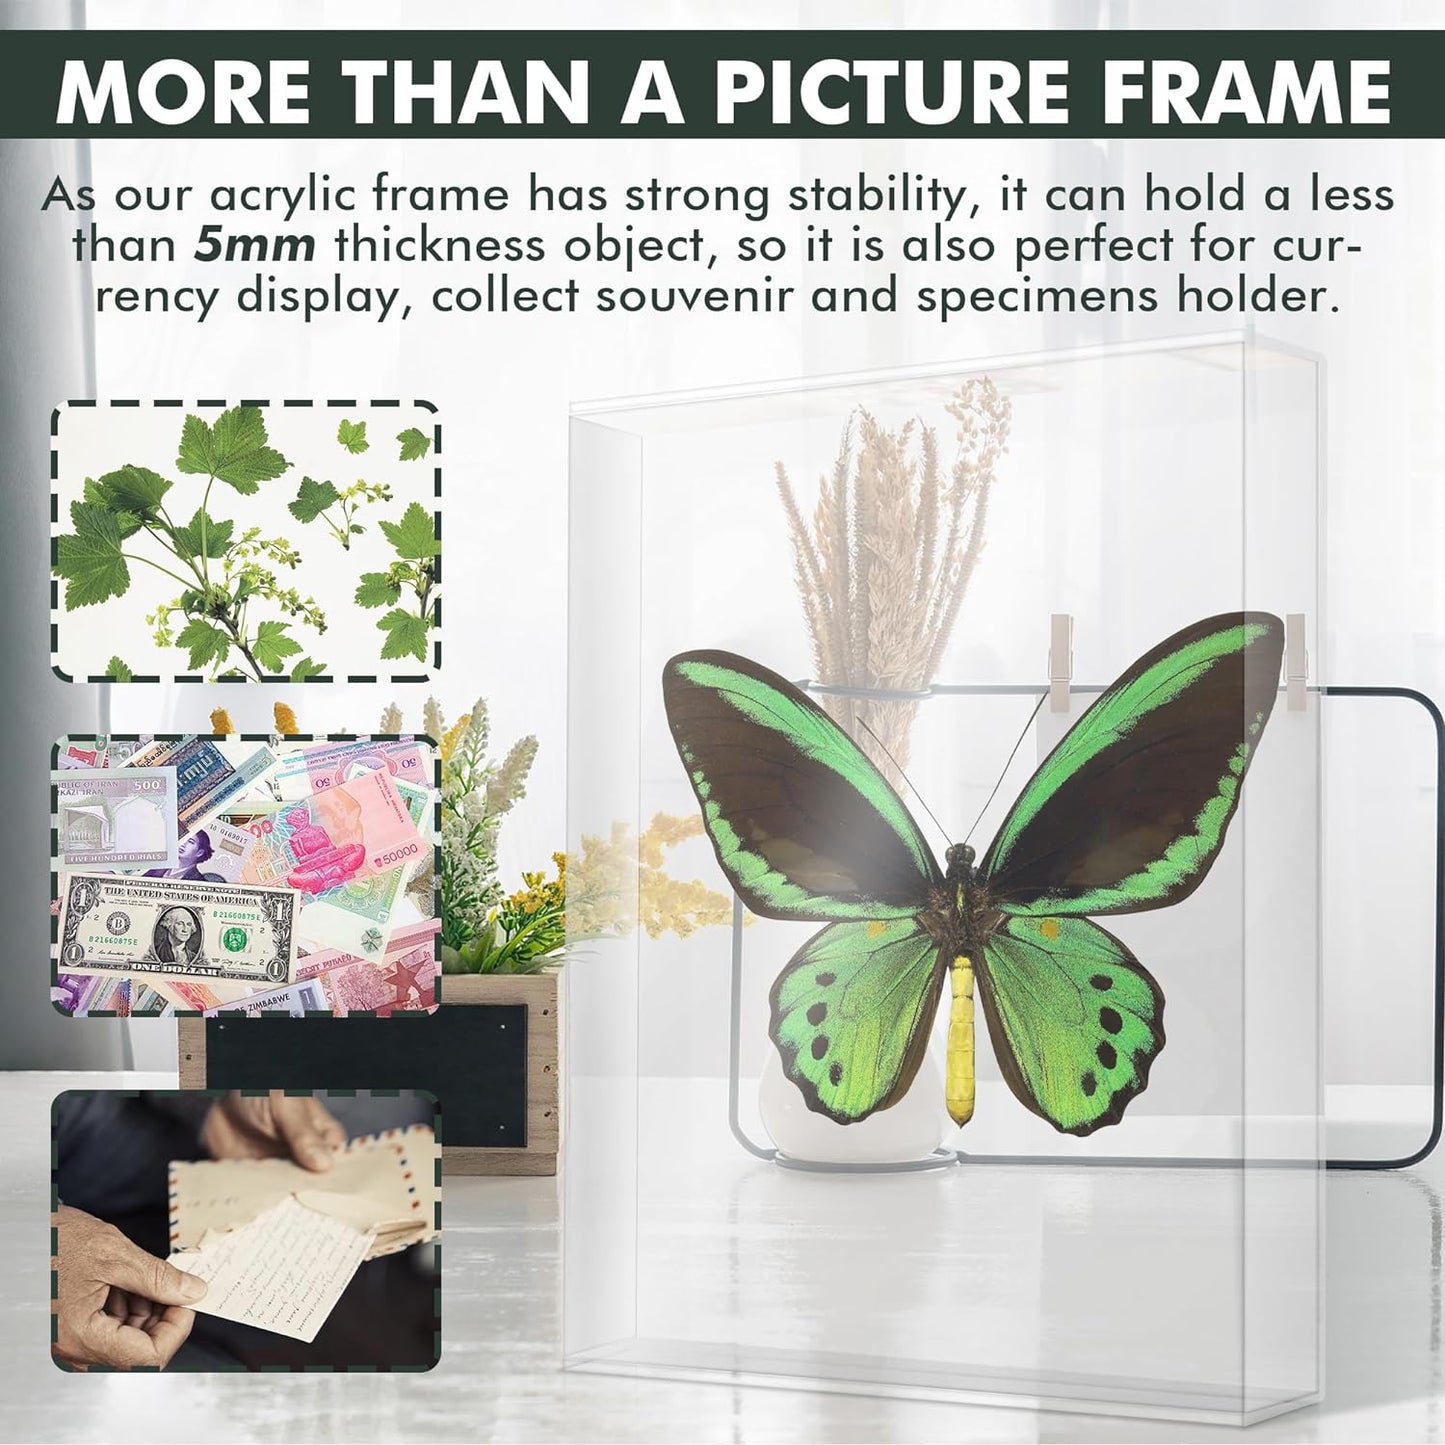 KOALA Acrylic Picture Photo Frame Double Sided Frameless Desktop Floating Display 5x7 inches 2 Pack